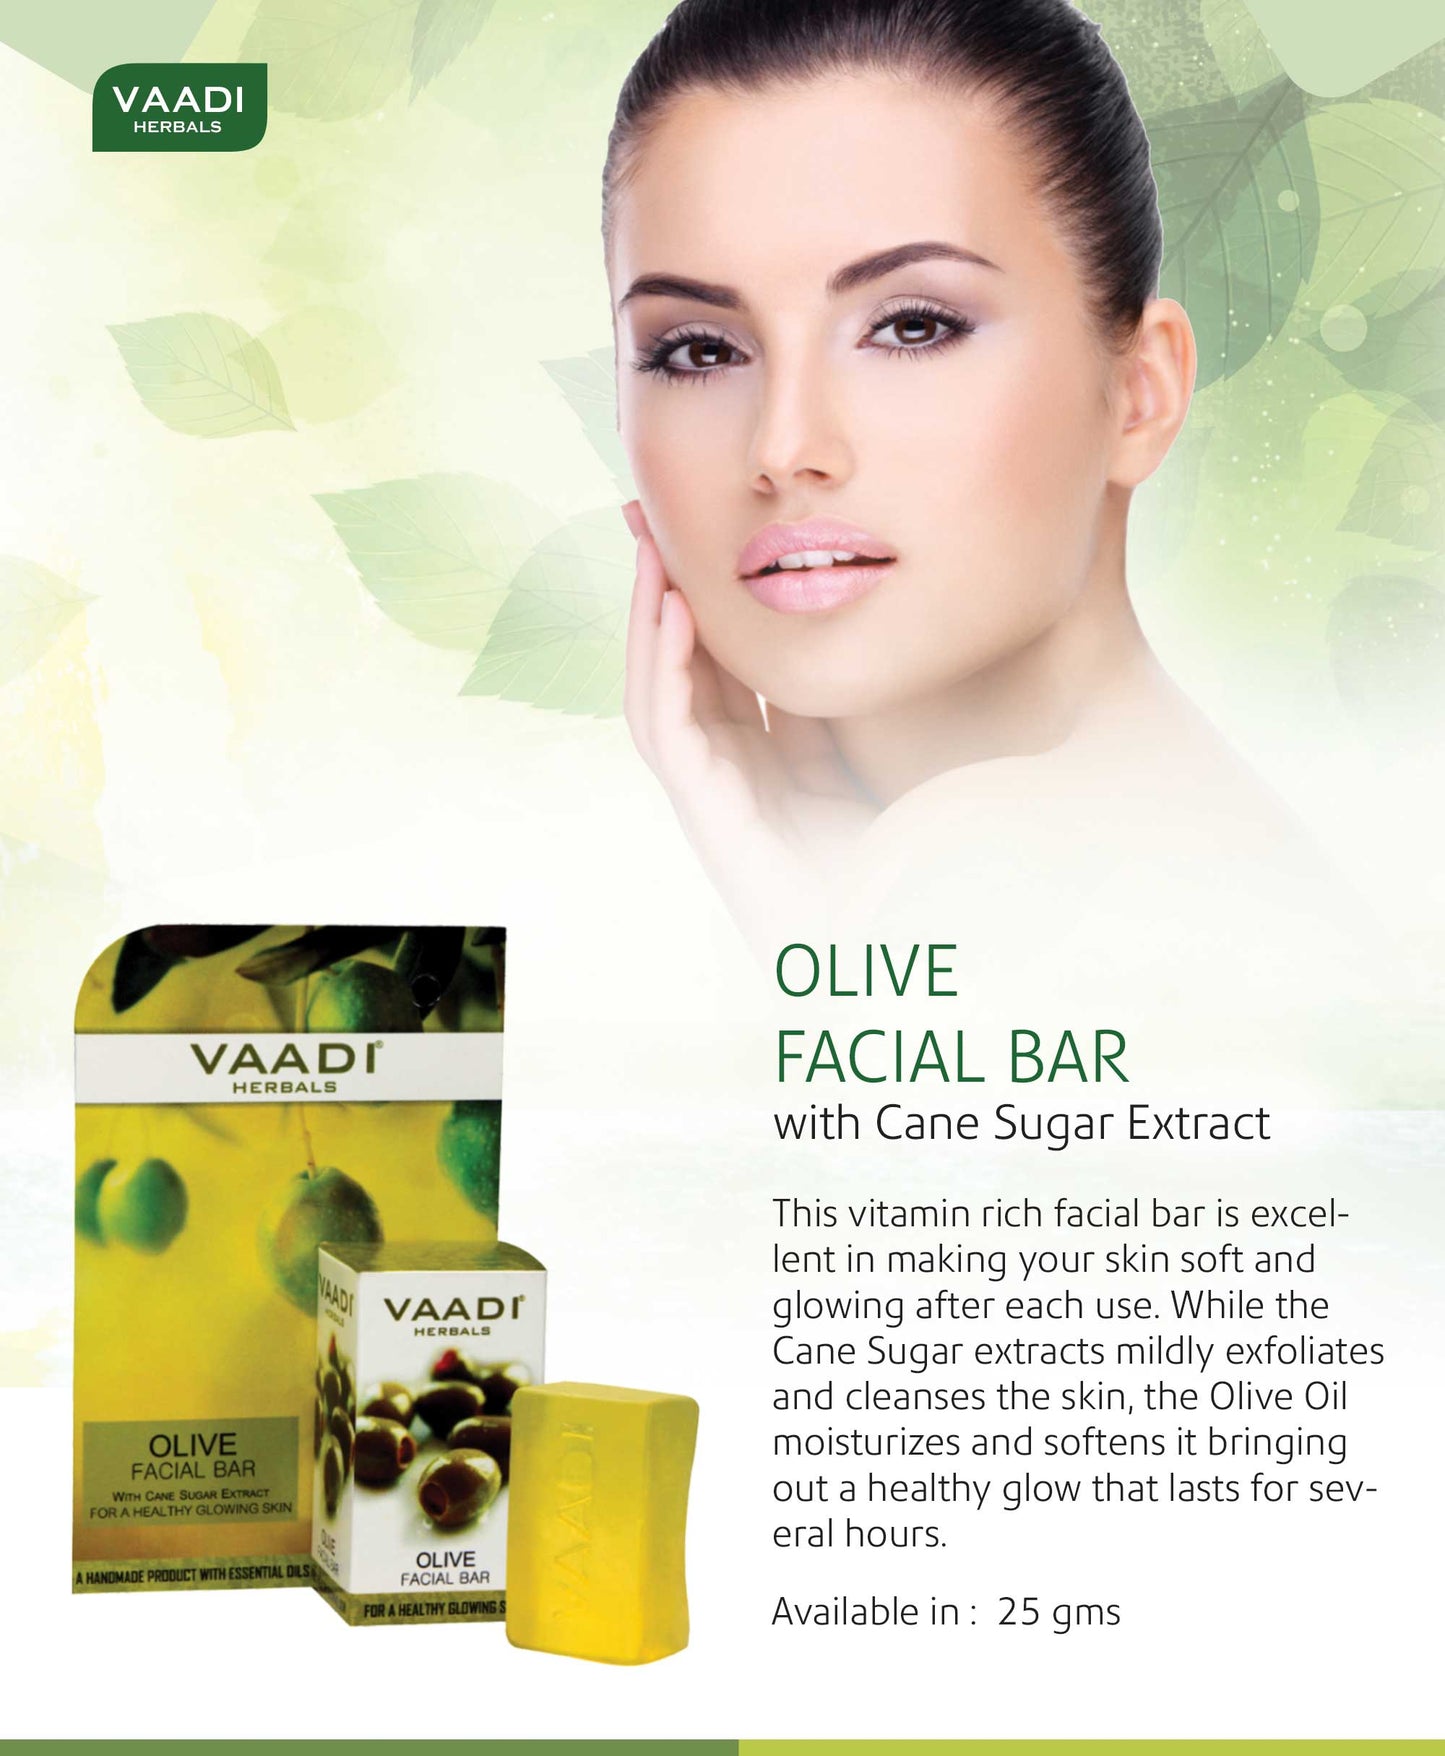 Organic Olive Facial Bar with Cane Sugar Extract - Exfoliates and Cleanses the Skin (25 gms/0.9 oz)